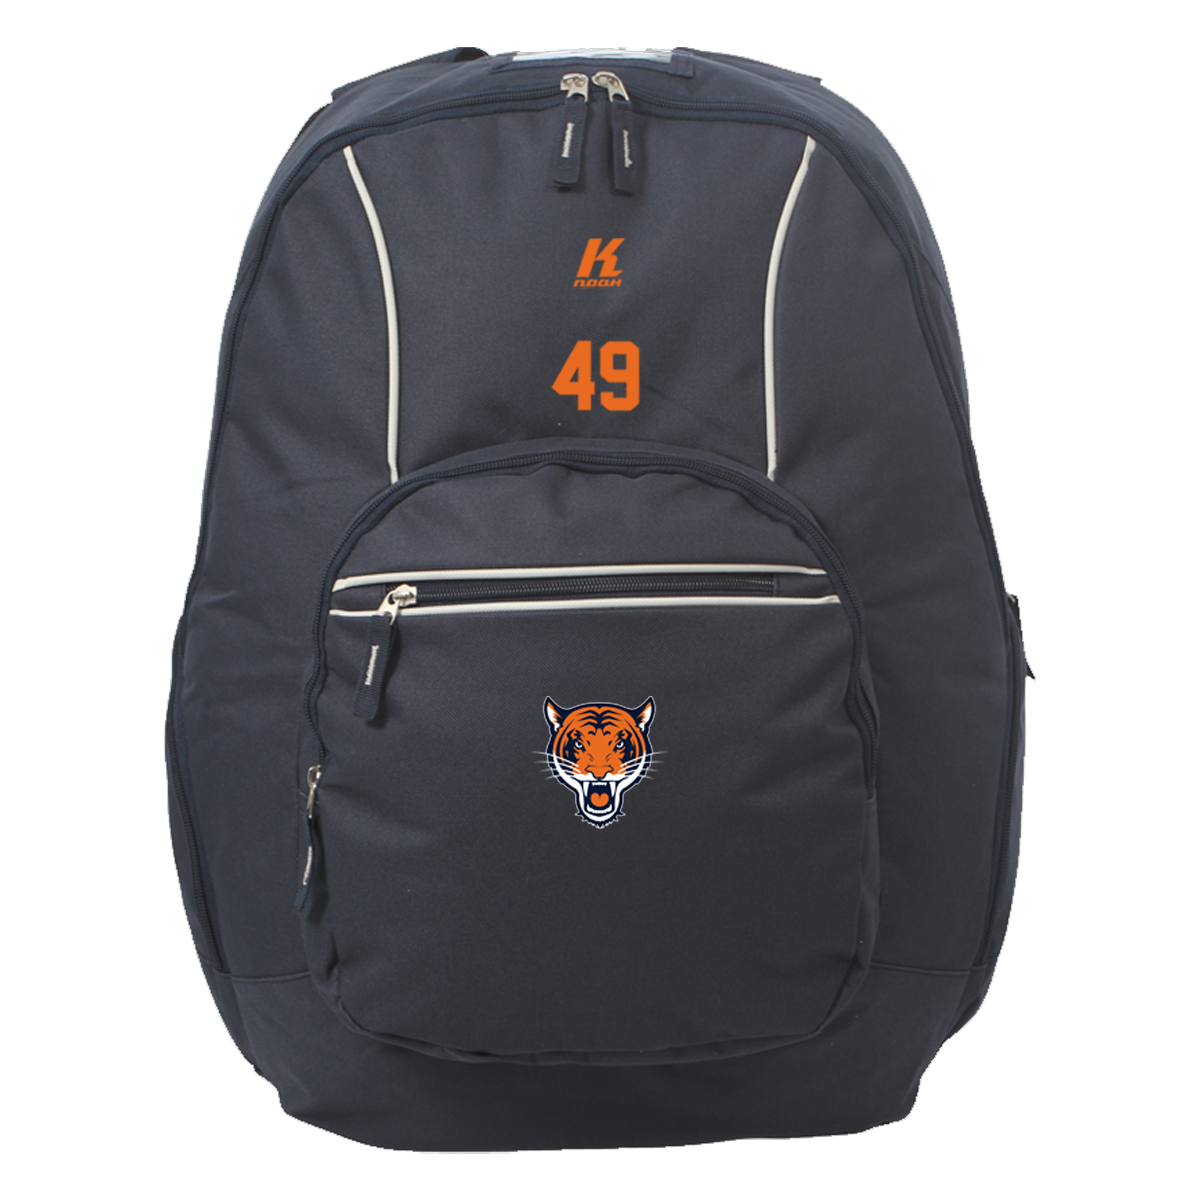 Tigers Heritage Backpack with Playernumber or Initials